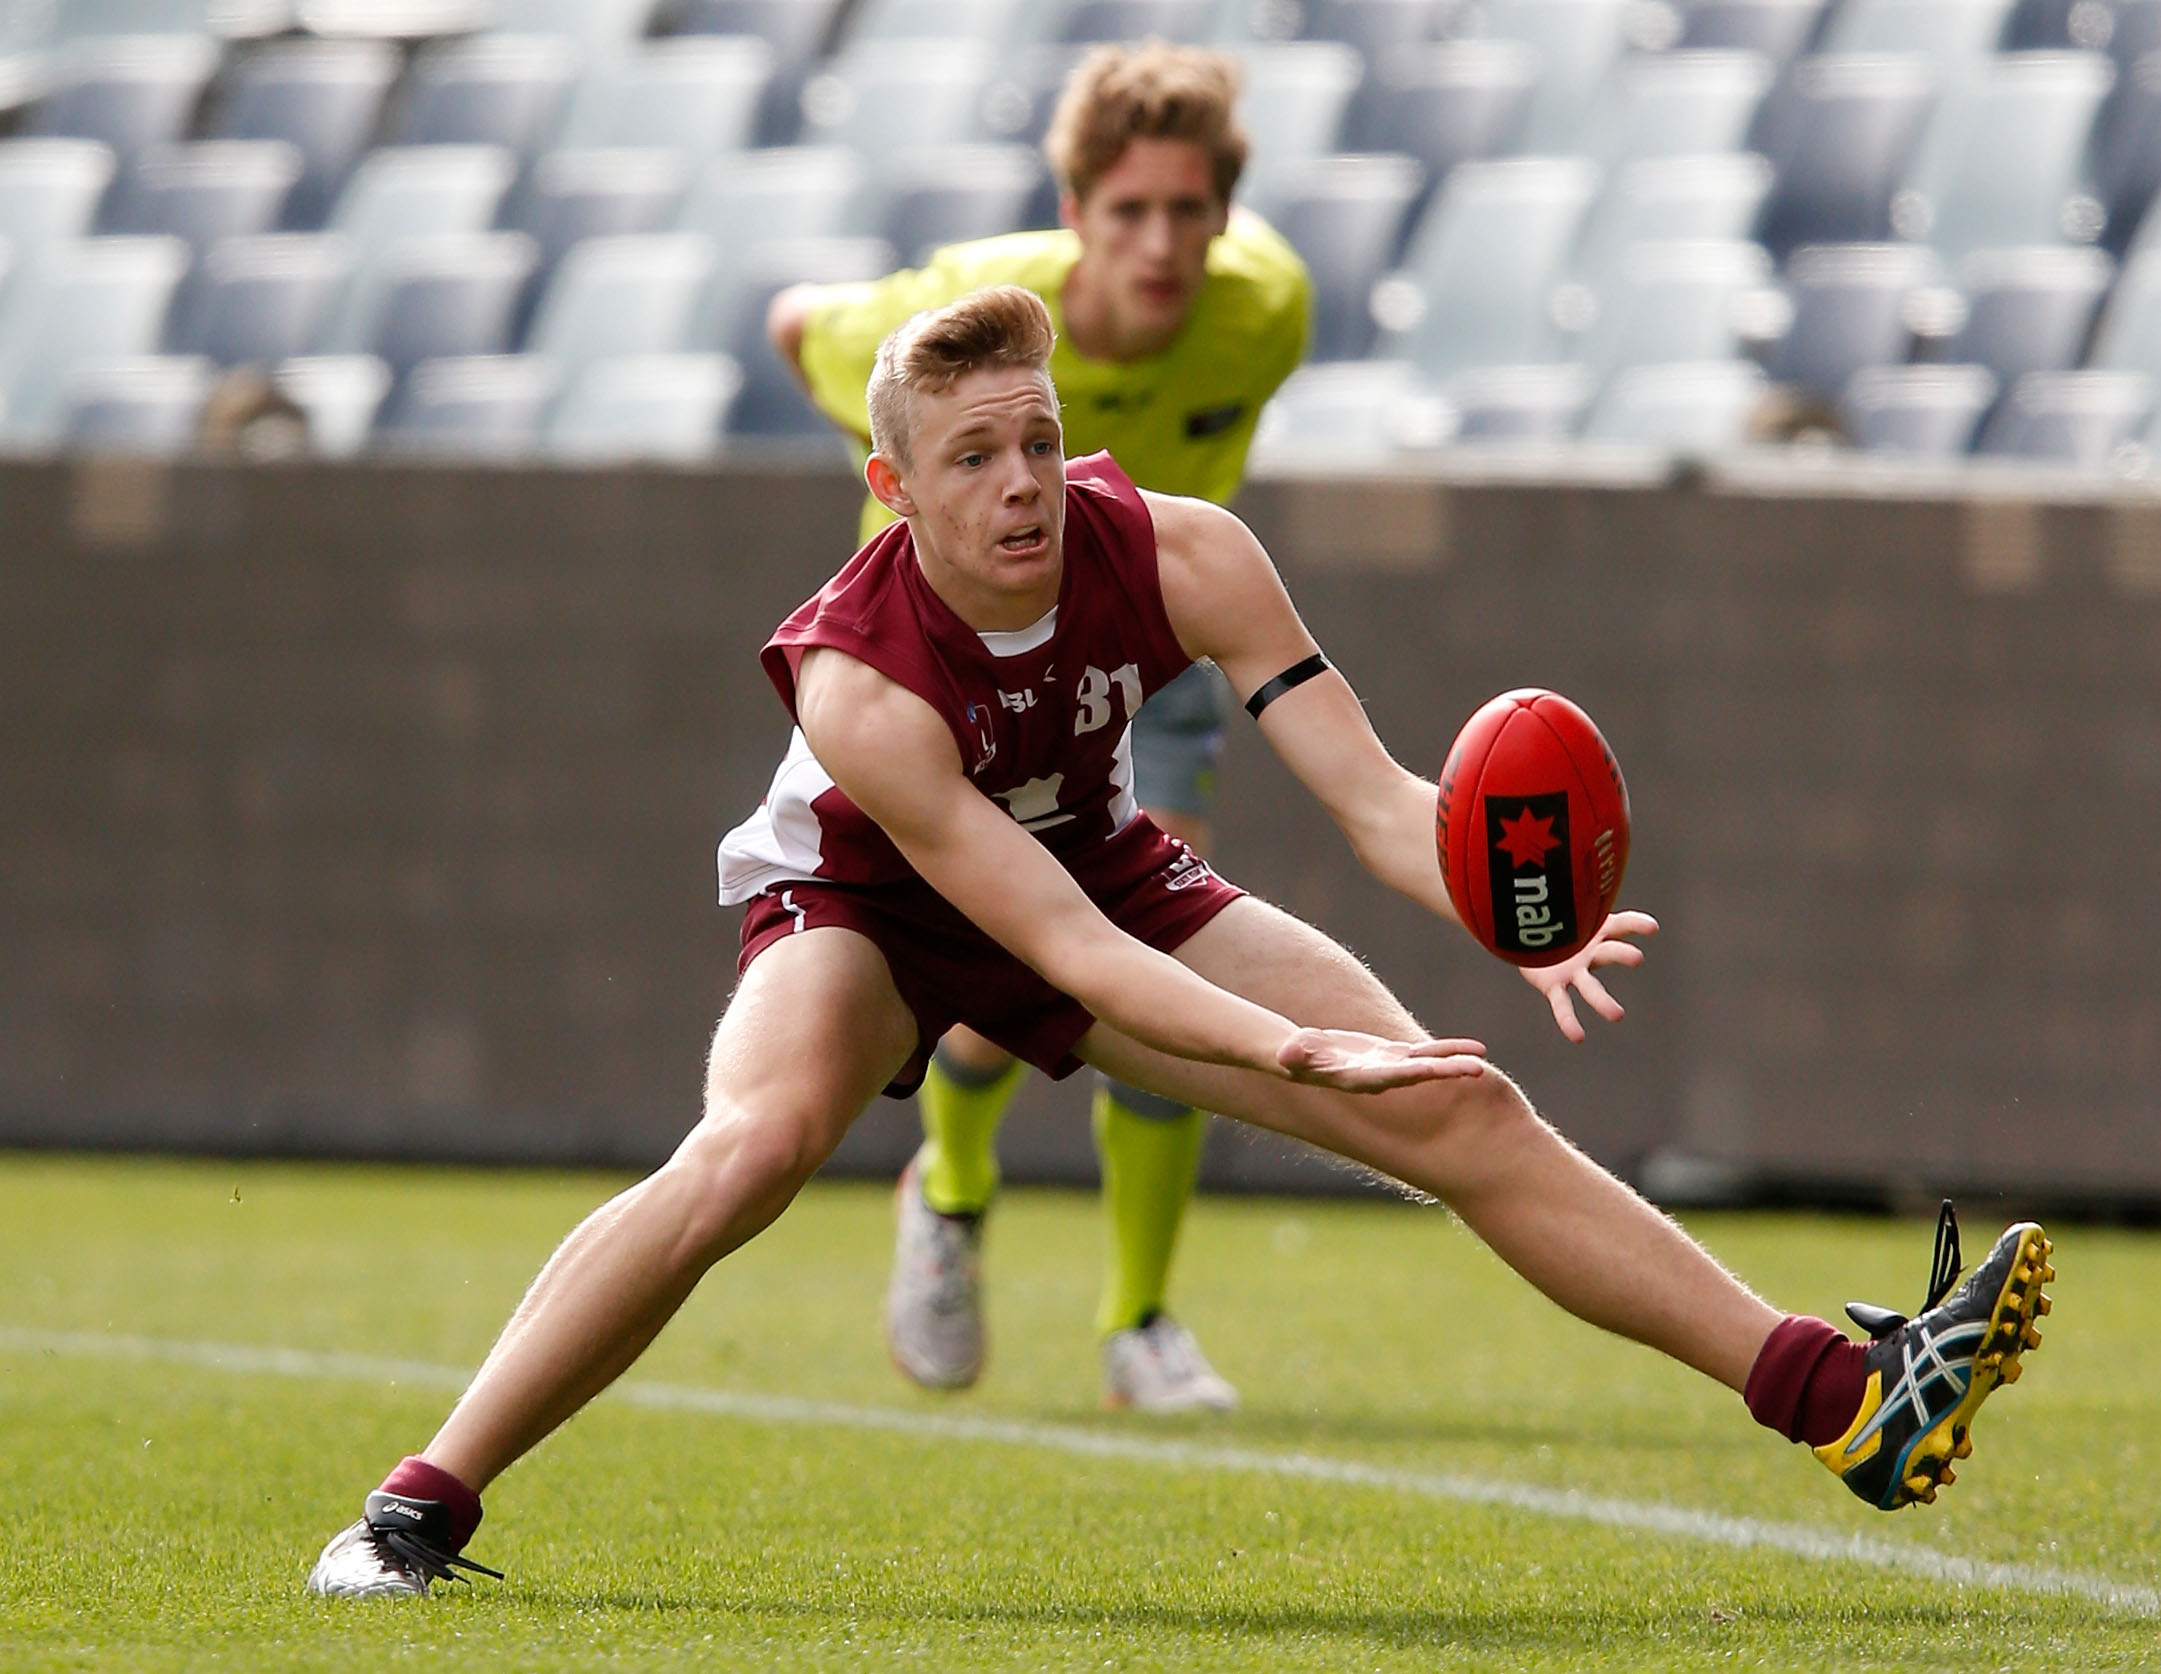 GEELONG, AUSTRALIA - JUNE 27: Max Spencer of Queensland gathers the ball during the 2015 AFL Under 18 match between Queensland and Tasmania at Simonds Stadium, Geelong on June 27, 2015. (Photo by Darrian Traynor/AFL Media)